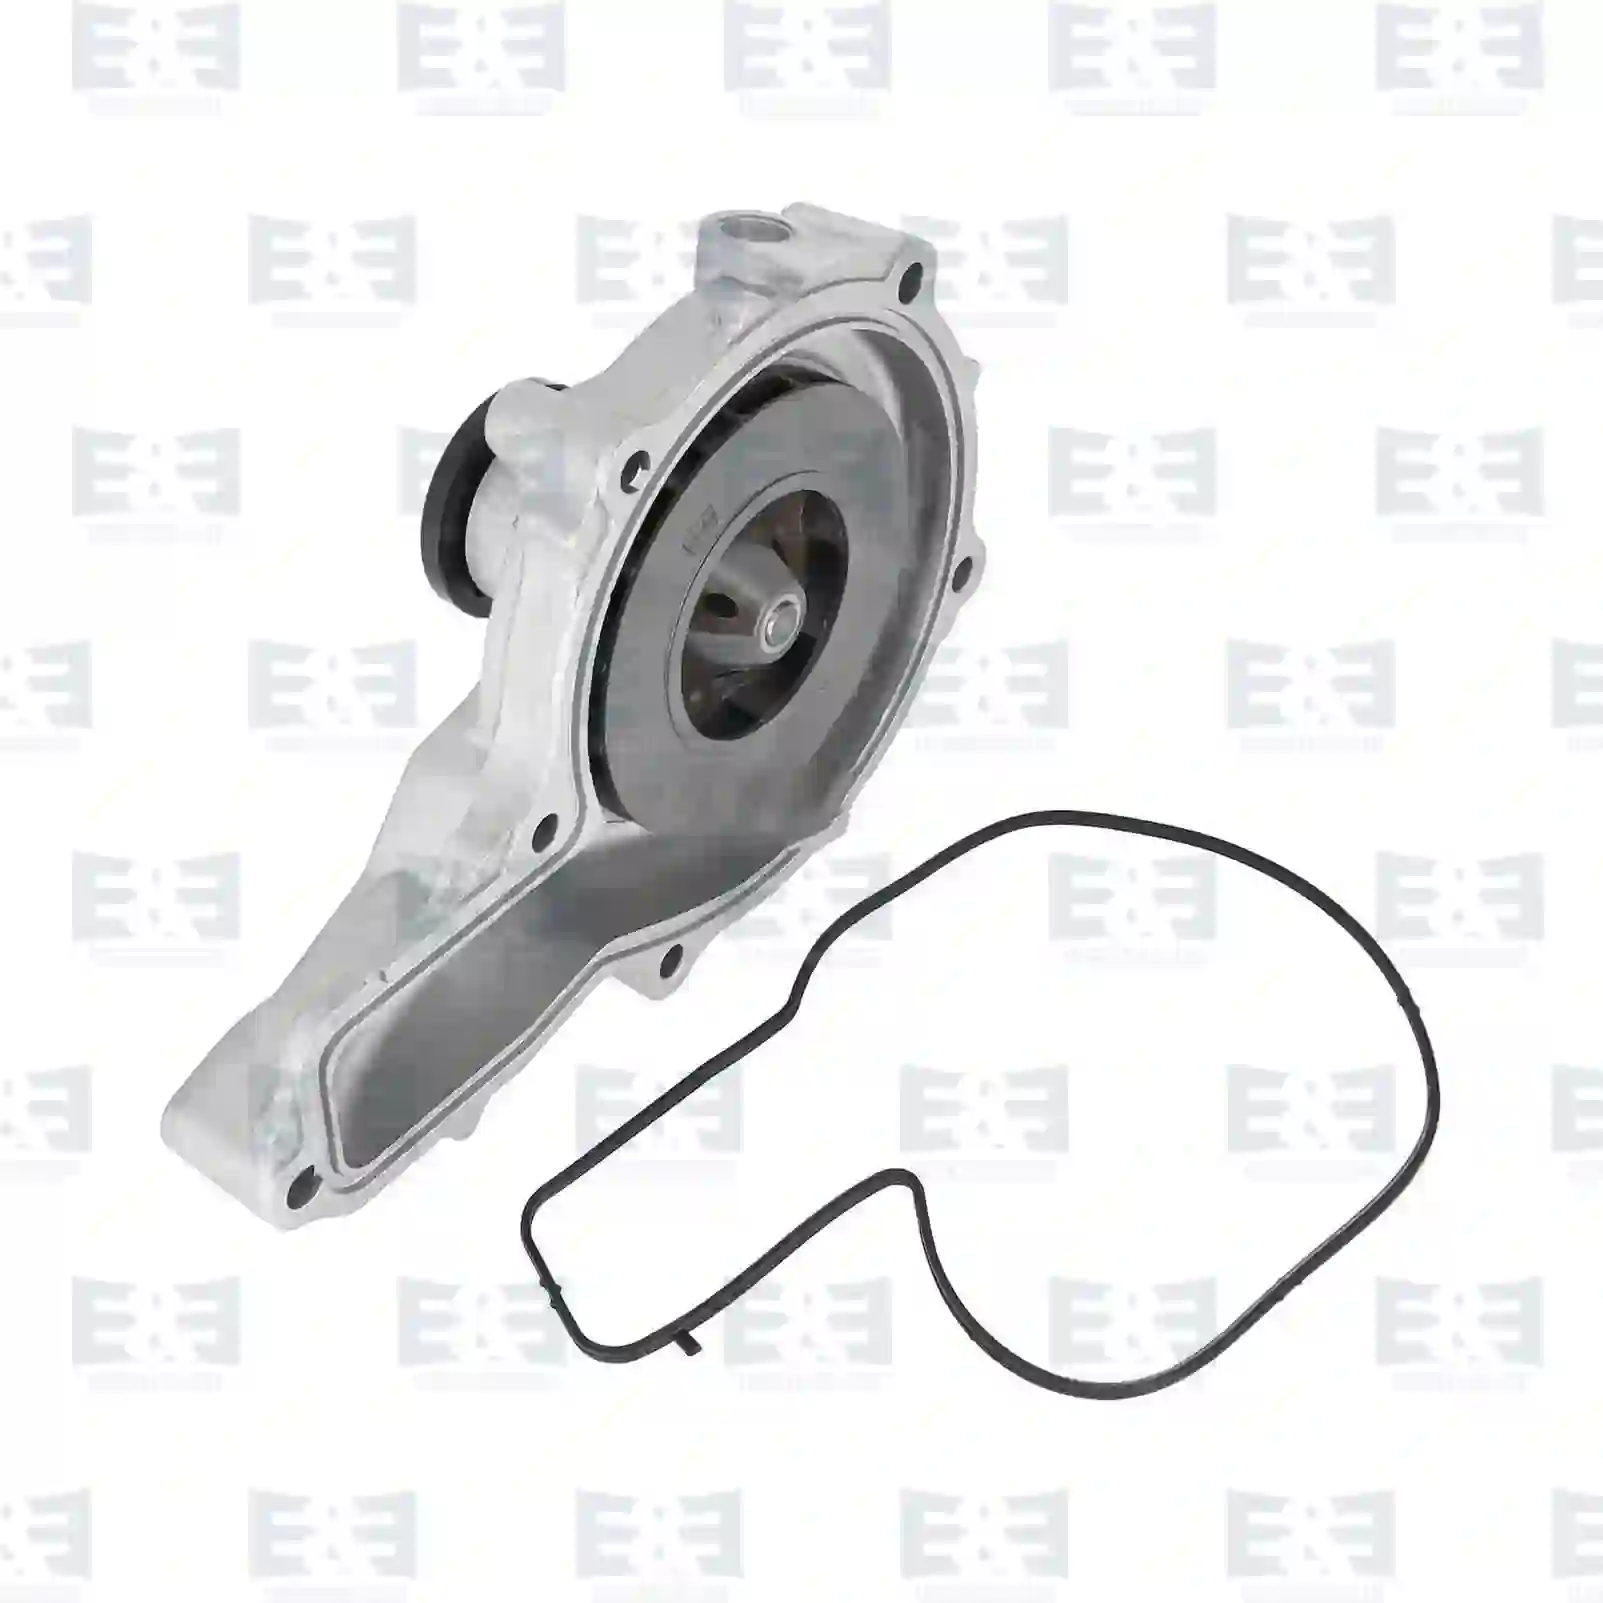 Water pump, without pulley, 2E2203982, 20744944, 21228795, 21468472, 22195450, 85003160, 85003709, 7420744939, 7420744940, 7421615952, 7422167707, 7422197707, 7485000763, 7485013068, 20451516, 20464403, 20538820, 20538845, 20744939, 20744940, 21221878, 21228793, 21468471, 21615952, 2201101, 22195450, 22197705, 22902431, 3161436, 3801102, 3801418, 3801484, 3803844, 3803930, 85000062, 85000347, 85000486, 85003125, 85003708, 85006062, 85020085, 85021450, ZG00771-0008 ||  2E2203982 E&E Truck Spare Parts | Truck Spare Parts, Auotomotive Spare Parts Water pump, without pulley, 2E2203982, 20744944, 21228795, 21468472, 22195450, 85003160, 85003709, 7420744939, 7420744940, 7421615952, 7422167707, 7422197707, 7485000763, 7485013068, 20451516, 20464403, 20538820, 20538845, 20744939, 20744940, 21221878, 21228793, 21468471, 21615952, 2201101, 22195450, 22197705, 22902431, 3161436, 3801102, 3801418, 3801484, 3803844, 3803930, 85000062, 85000347, 85000486, 85003125, 85003708, 85006062, 85020085, 85021450, ZG00771-0008 ||  2E2203982 E&E Truck Spare Parts | Truck Spare Parts, Auotomotive Spare Parts